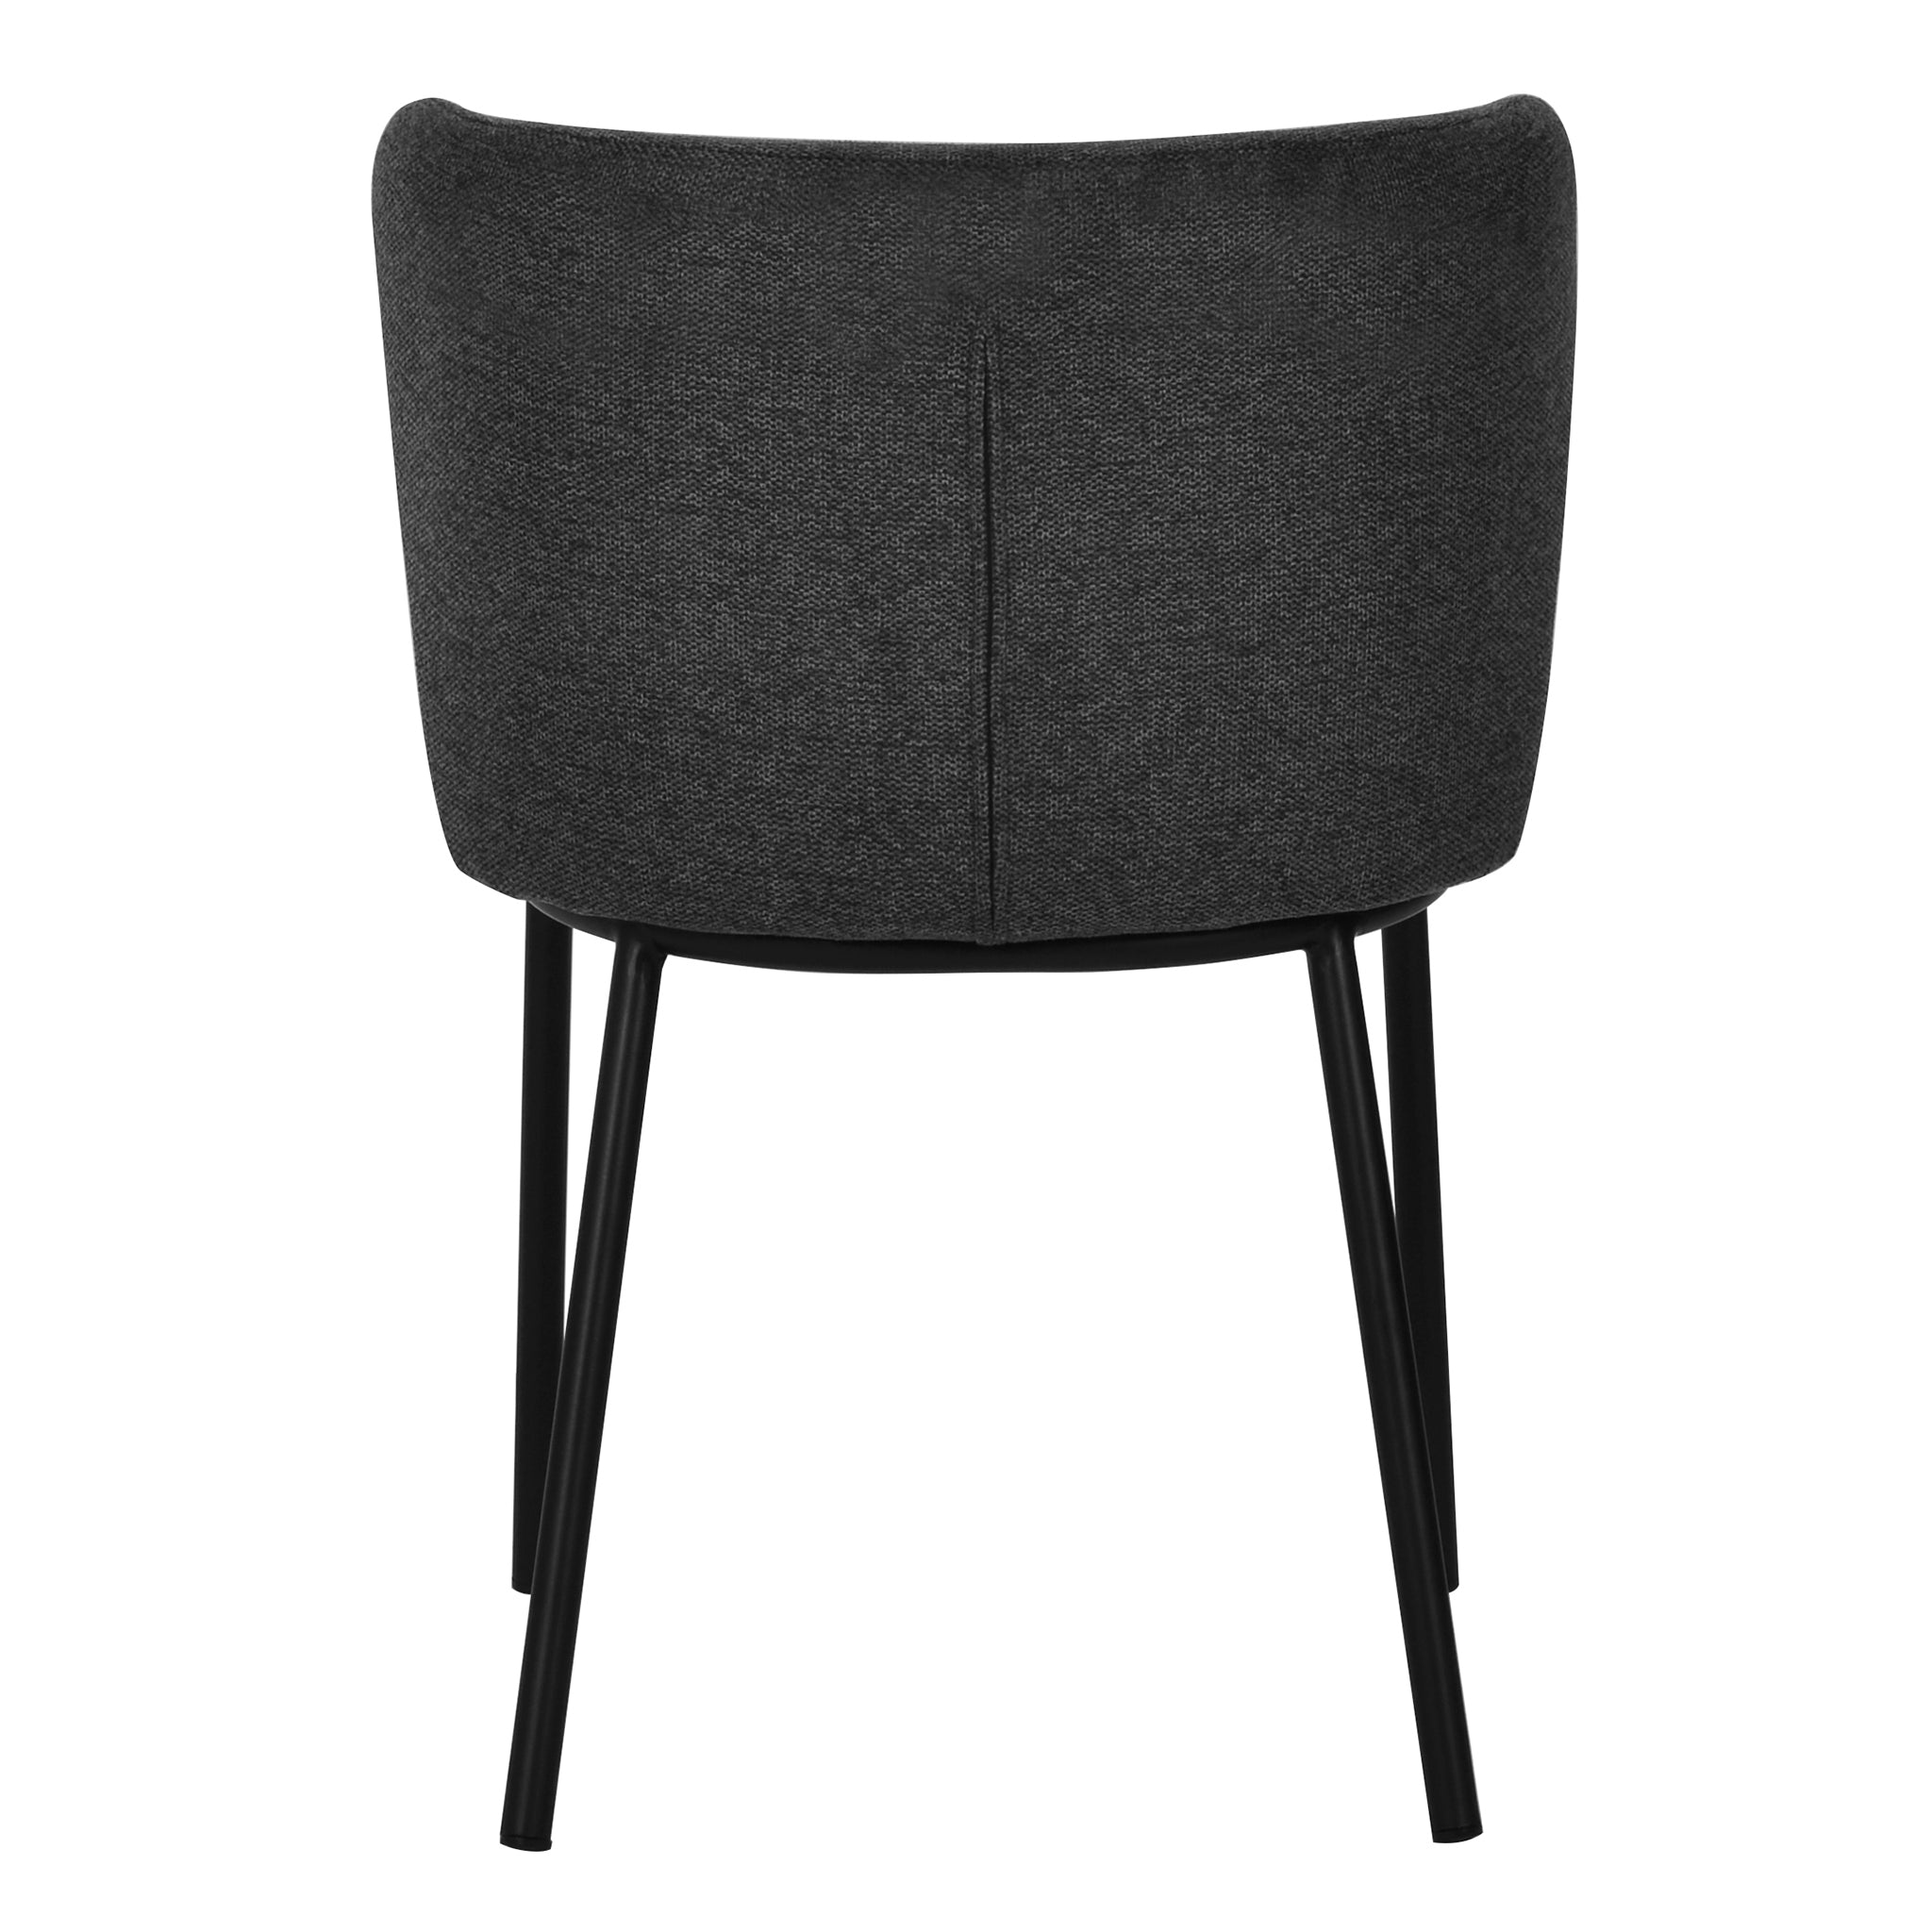 Set of 2 James Fabric Dining Chair - Charcoal Grey - Dining Chairs